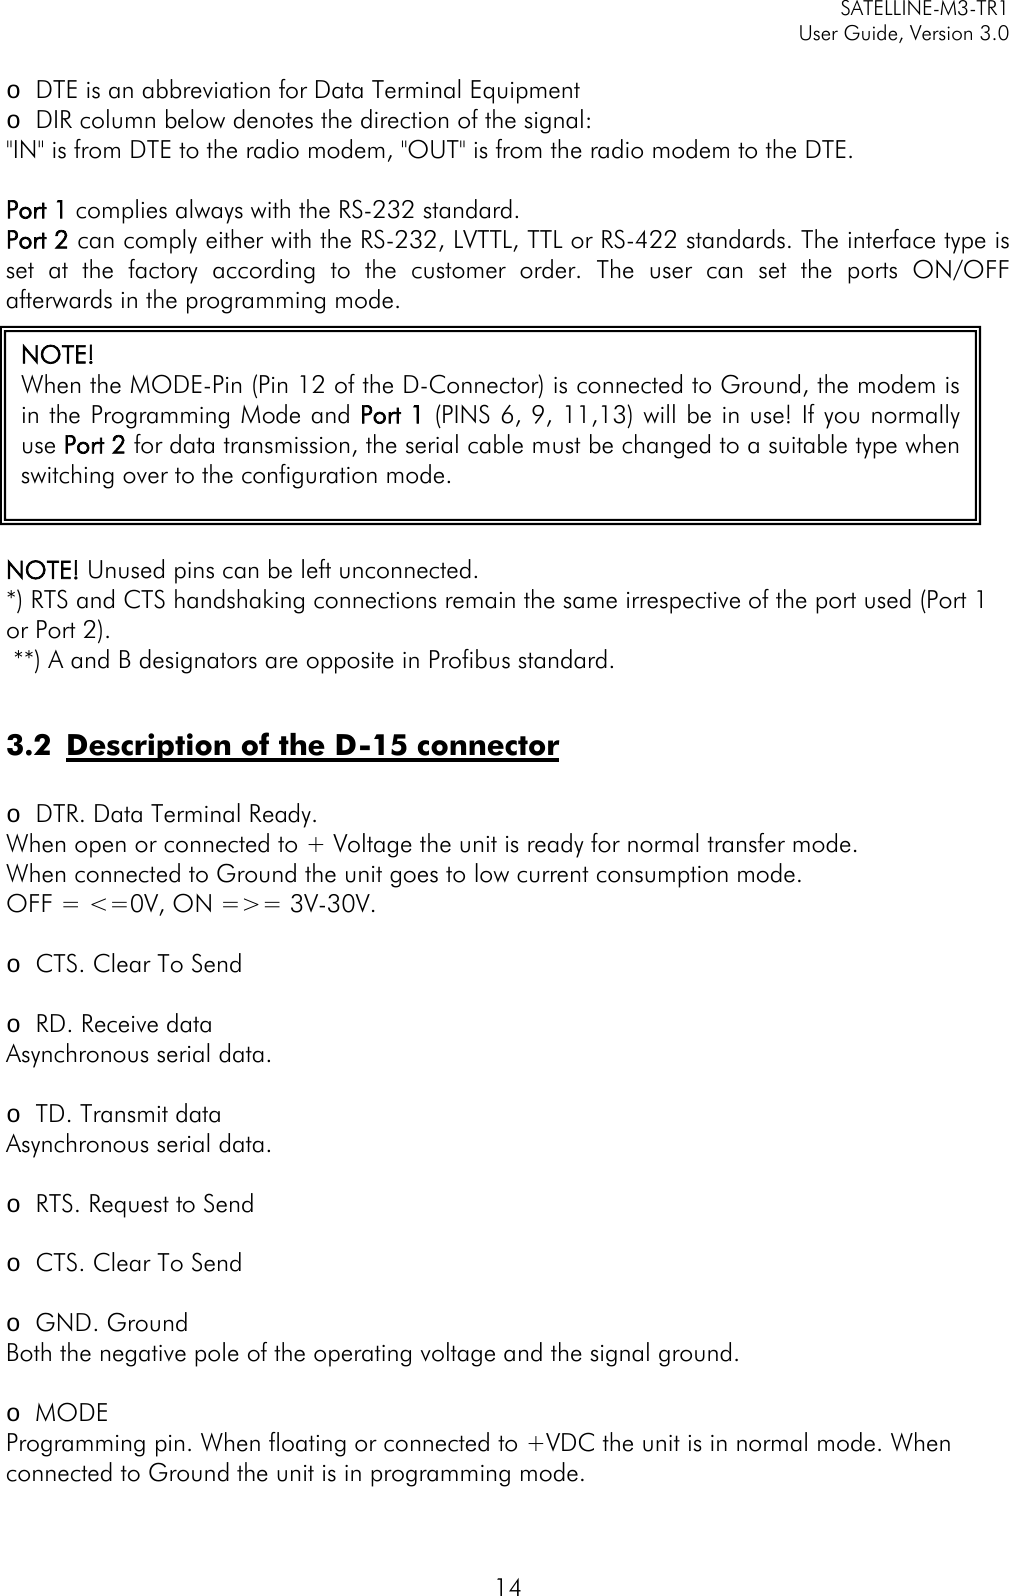     SATELLINE-M3-TR1     User Guide, Version 3.0  14  o DTE is an abbreviation for Data Terminal Equipment o DIR column below denotes the direction of the signal:  &quot;IN&quot; is from DTE to the radio modem, &quot;OUT&quot; is from the radio modem to the DTE.  Port 1 complies always with the RS-232 standard. Port 2 can comply either with the RS-232, LVTTL, TTL or RS-422 standards. The interface type is set at the factory according to the customer order. The user can set the ports ON/OFF afterwards in the programming mode.  NOTE! Unused pins can be left unconnected. *) RTS and CTS handshaking connections remain the same irrespective of the port used (Port 1 or Port 2).  **) A and B designators are opposite in Profibus standard.   3.2 Description of the D-15 connector  o DTR. Data Terminal Ready. When open or connected to + Voltage the unit is ready for normal transfer mode.  When connected to Ground the unit goes to low current consumption mode.  OFF = &lt;=0V, ON =&gt;= 3V-30V.  o CTS. Clear To Send  o RD. Receive data Asynchronous serial data.  o TD. Transmit data Asynchronous serial data.  o RTS. Request to Send  o CTS. Clear To Send  o GND. Ground Both the negative pole of the operating voltage and the signal ground.  o MODE Programming pin. When floating or connected to +VDC the unit is in normal mode. When connected to Ground the unit is in programming mode.  NOTE! When the MODE-Pin (Pin 12 of the D-Connector) is connected to Ground, the modem is in the Programming Mode and Port 1 (PINS 6, 9, 11,13) will be in use! If you normally use Port 2 for data transmission, the serial cable must be changed to a suitable type when switching over to the configuration mode.  